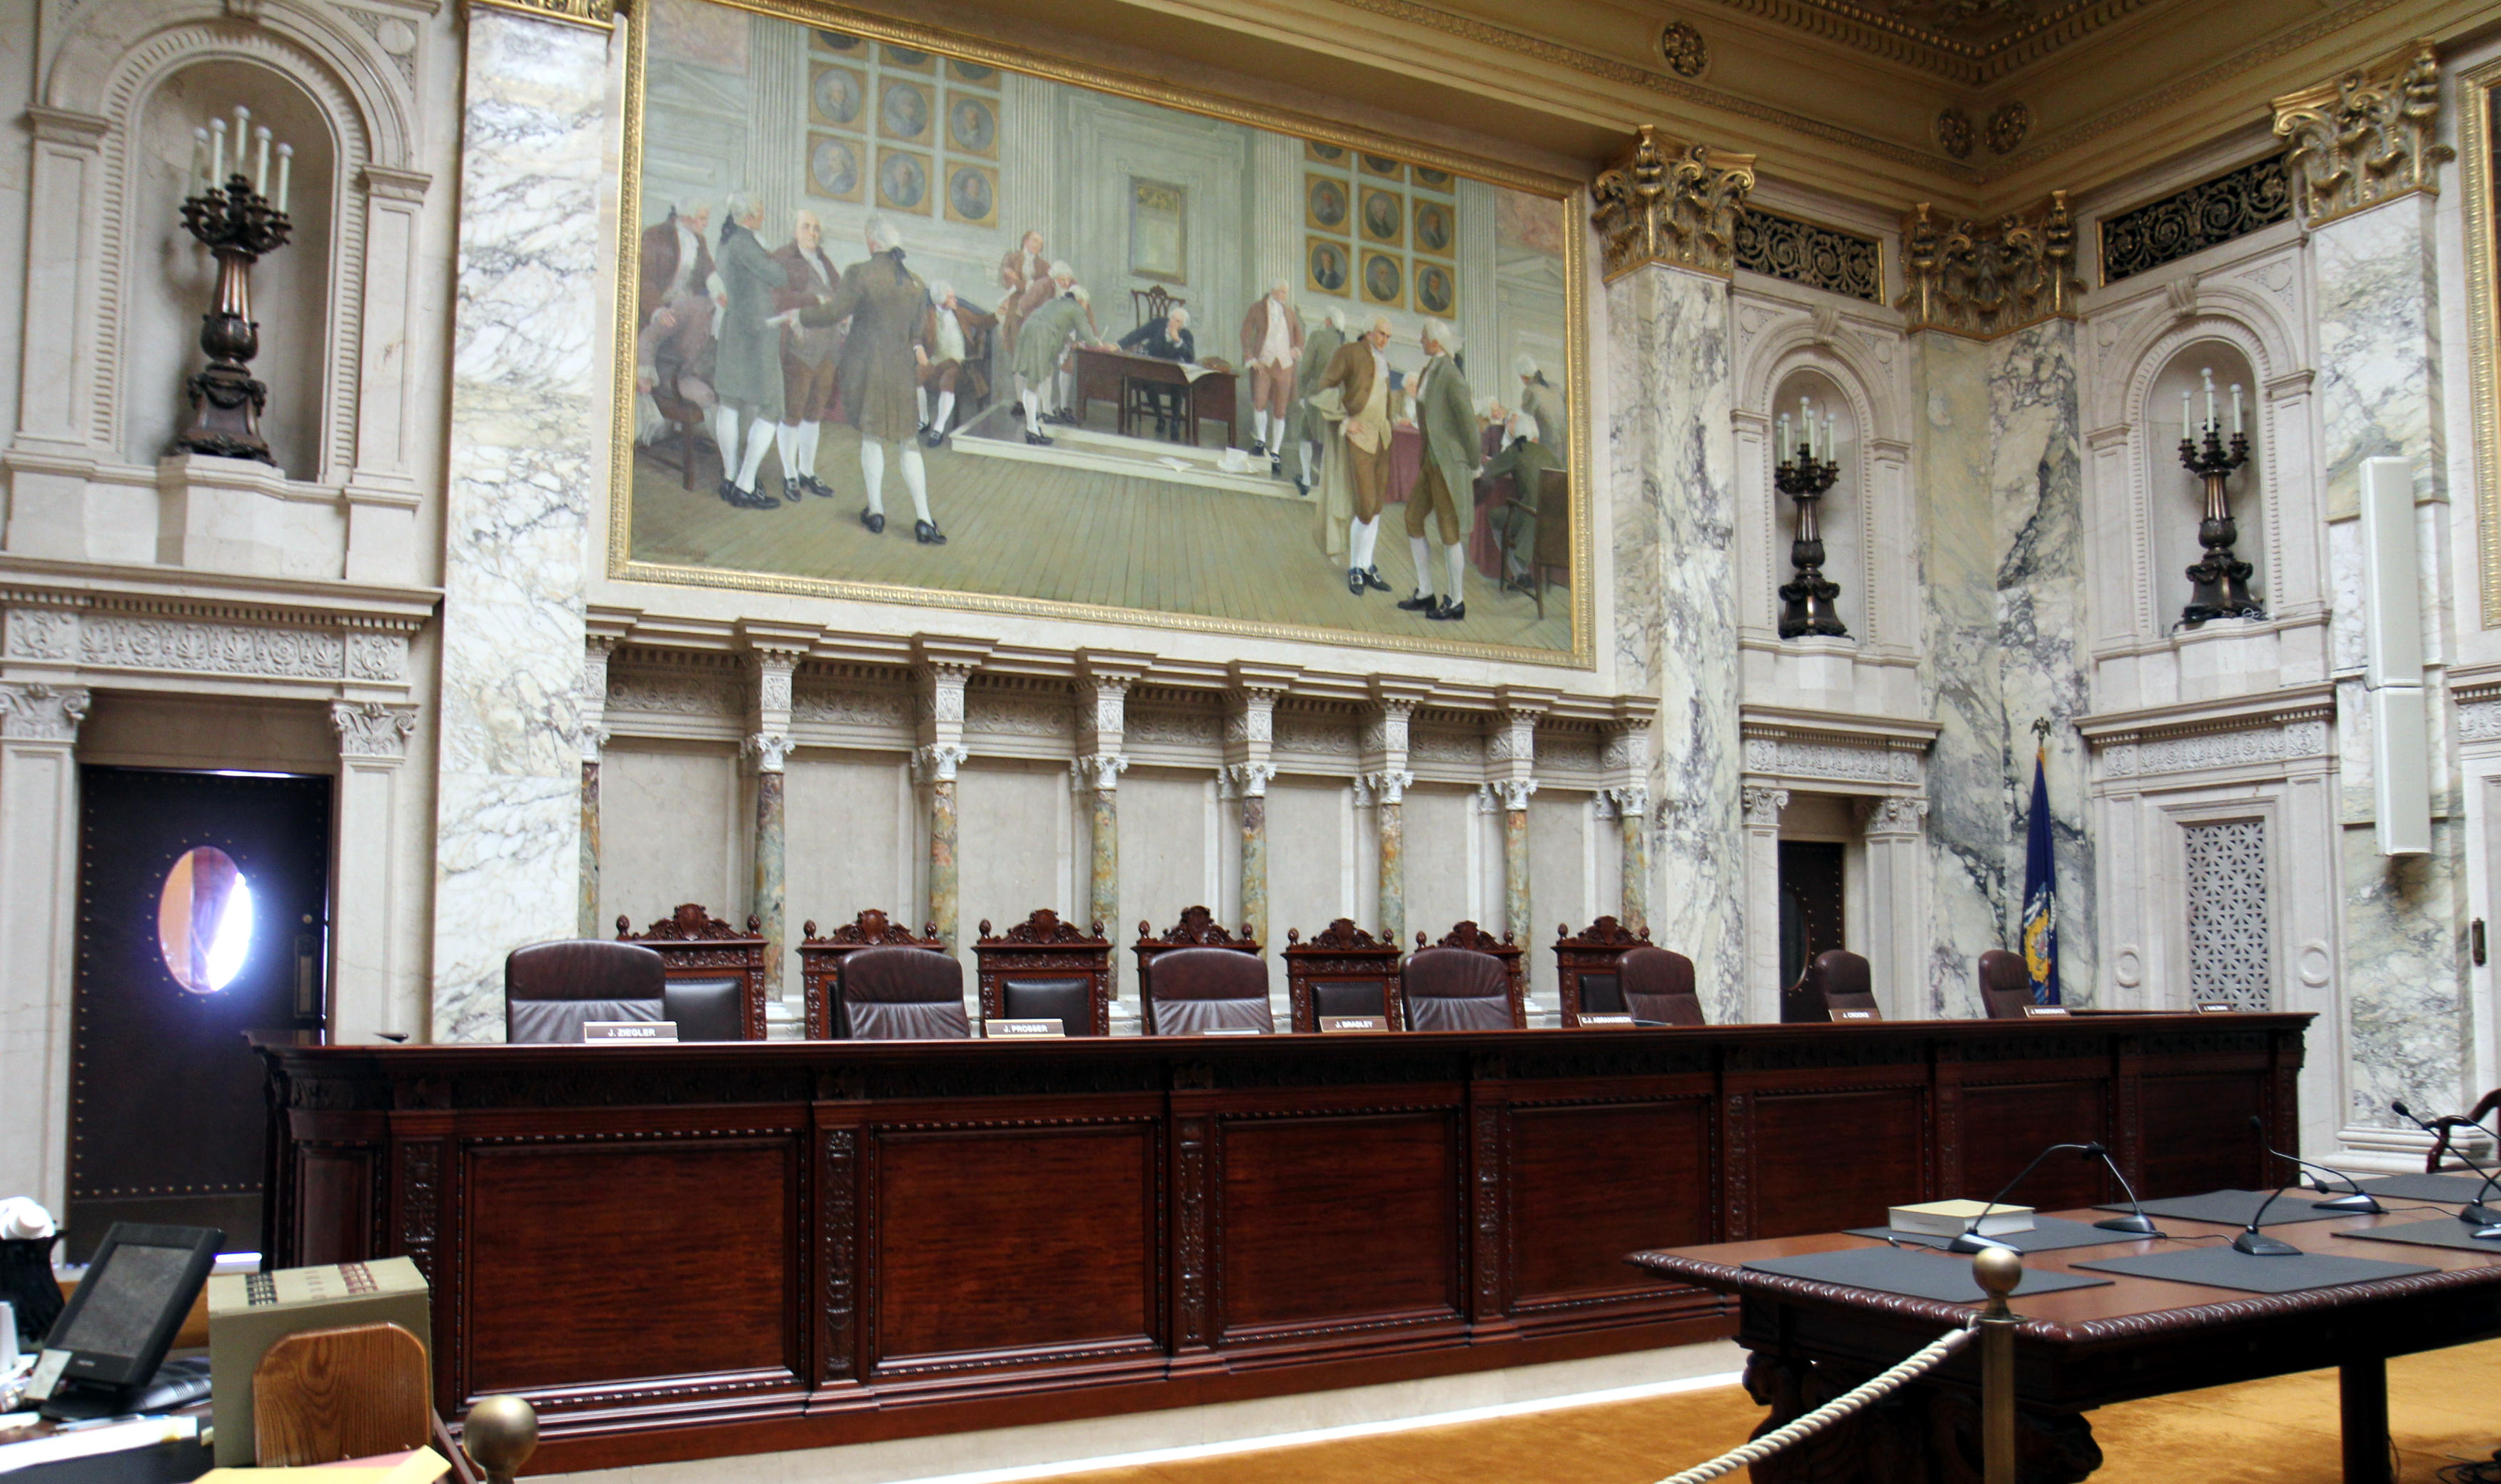 Court room of the Wisconsin Supreme Court in Madison's state capitol building.